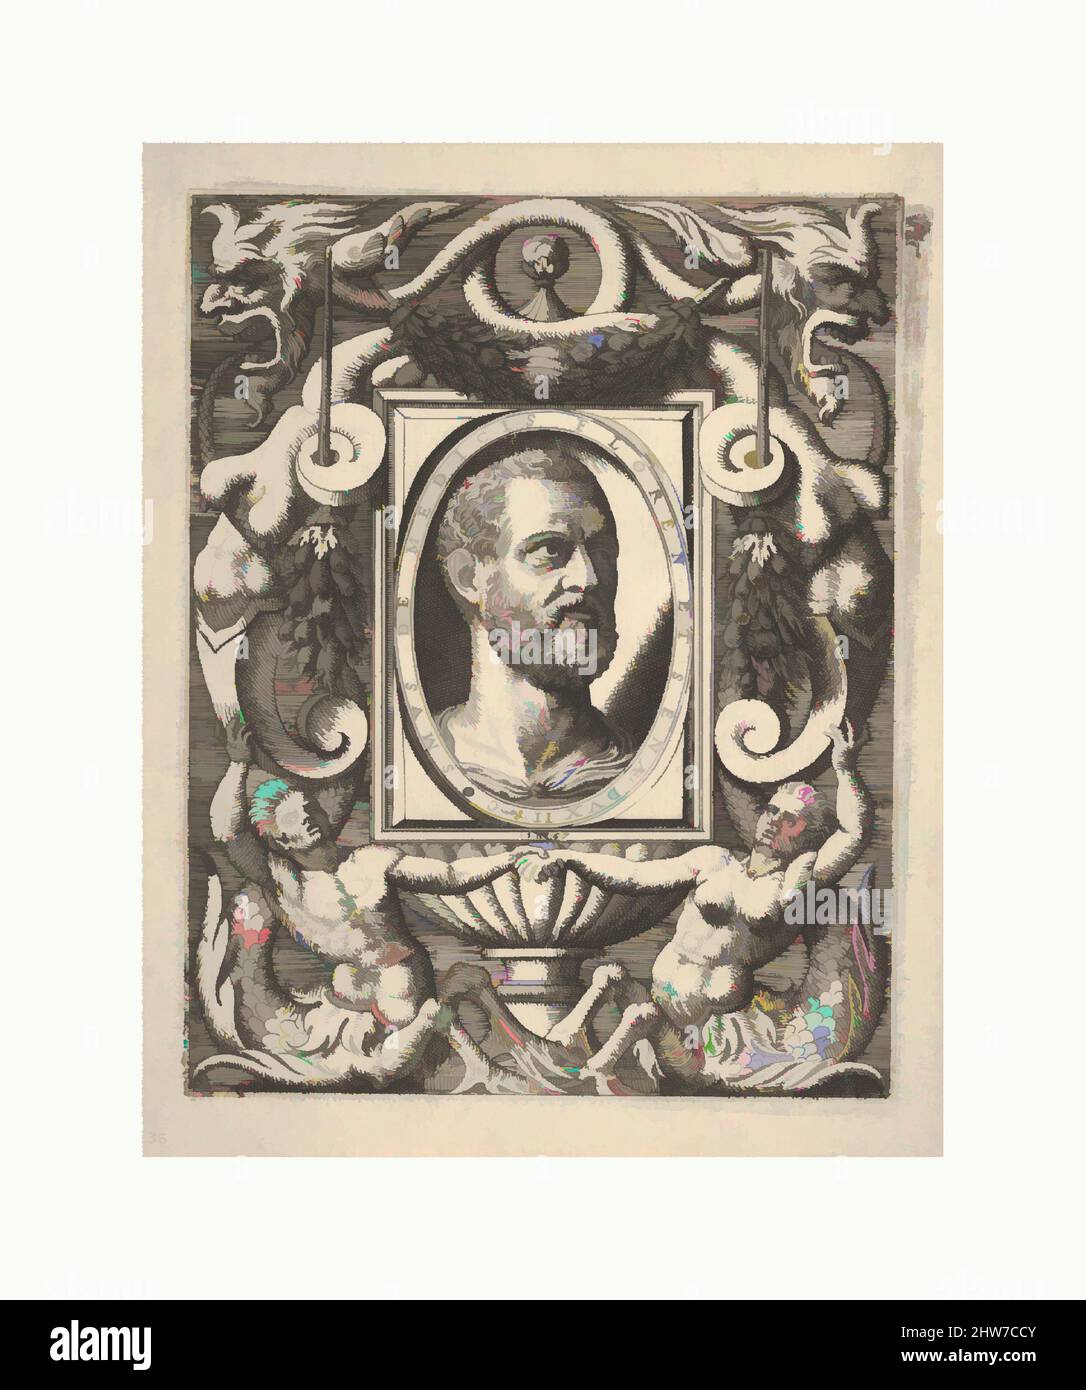 Art inspired by Bust portrait of Cosimo I de' Medici, in an oval frame set within a rectangular plaque, surrounded by fantastical ornament, 1567, Etching and engraving, plate: 6 7/8 x 5 7/16 in. (17.5 x 13.8 cm), Nicolò Nelli (Italian, active Venice, ca. 1552–79, Classic works modernized by Artotop with a splash of modernity. Shapes, color and value, eye-catching visual impact on art. Emotions through freedom of artworks in a contemporary way. A timeless message pursuing a wildly creative new direction. Artists turning to the digital medium and creating the Artotop NFT Stock Photo